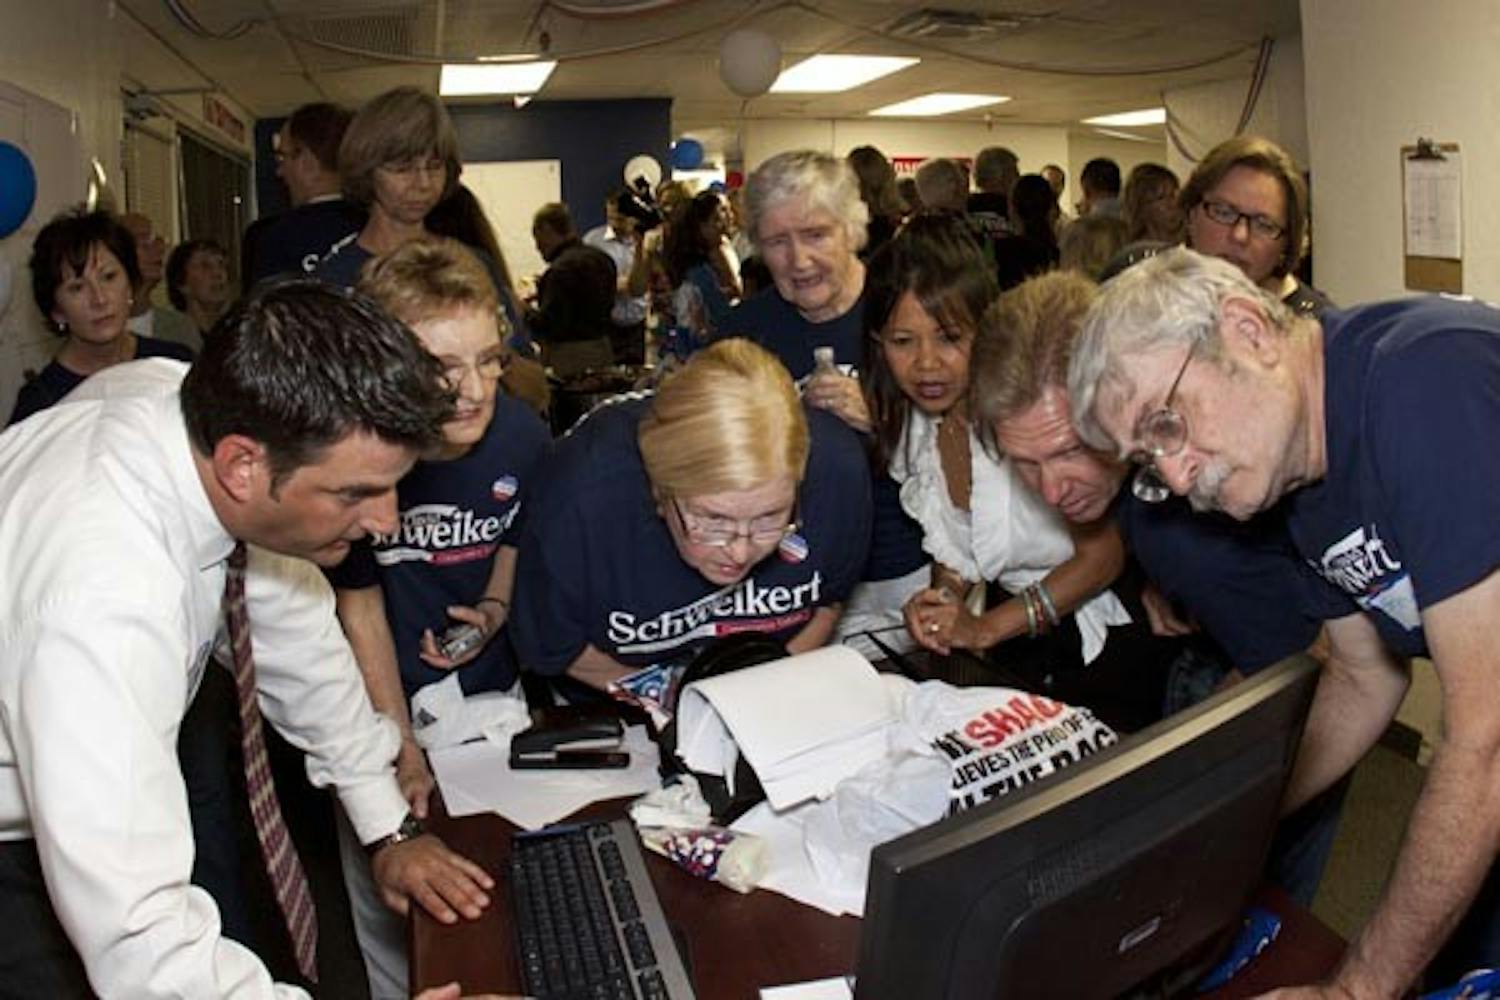 AWAITING A WIN: Campaign members for David Schweikert anxiously crowd around the computer monitor as election poll results filter in Tuesday night. (Photo by Annie Wechter)